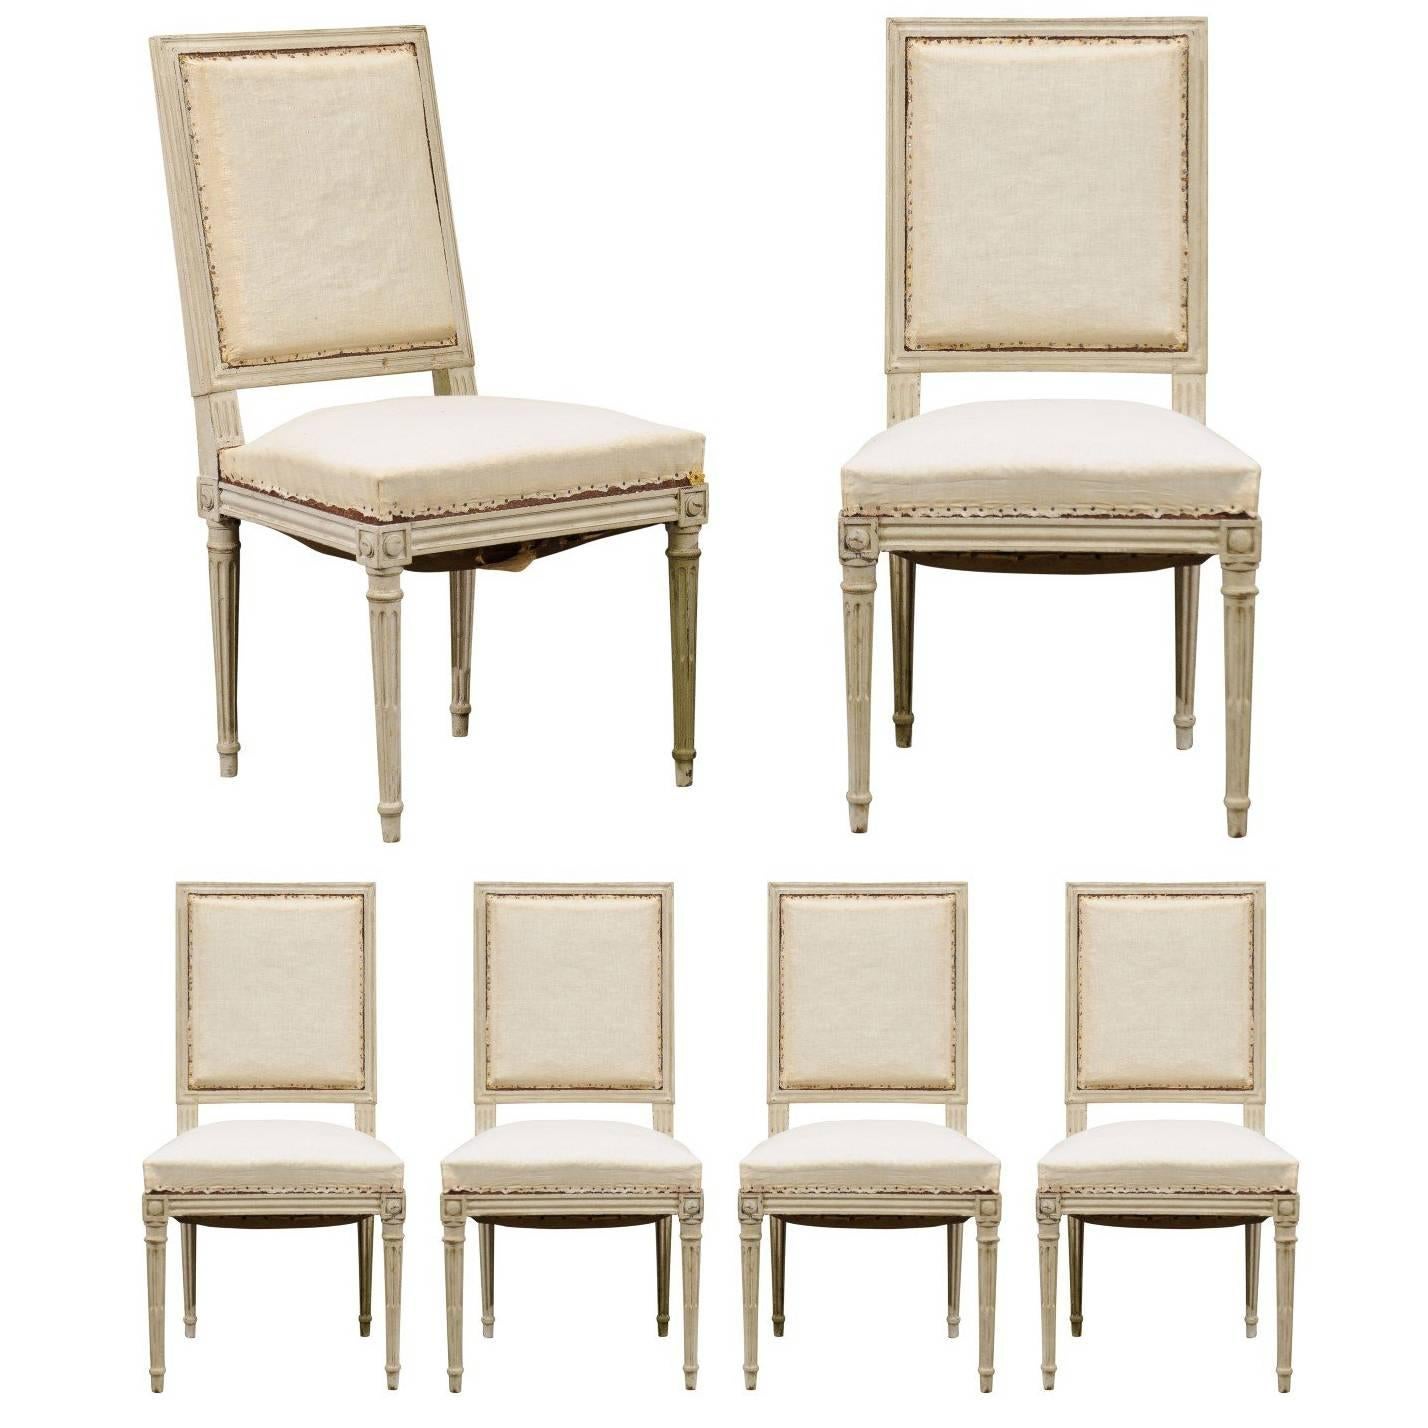 Set of Six Louis XVI Swedish Style Dining Room Upholstered Chairs from the 1900s